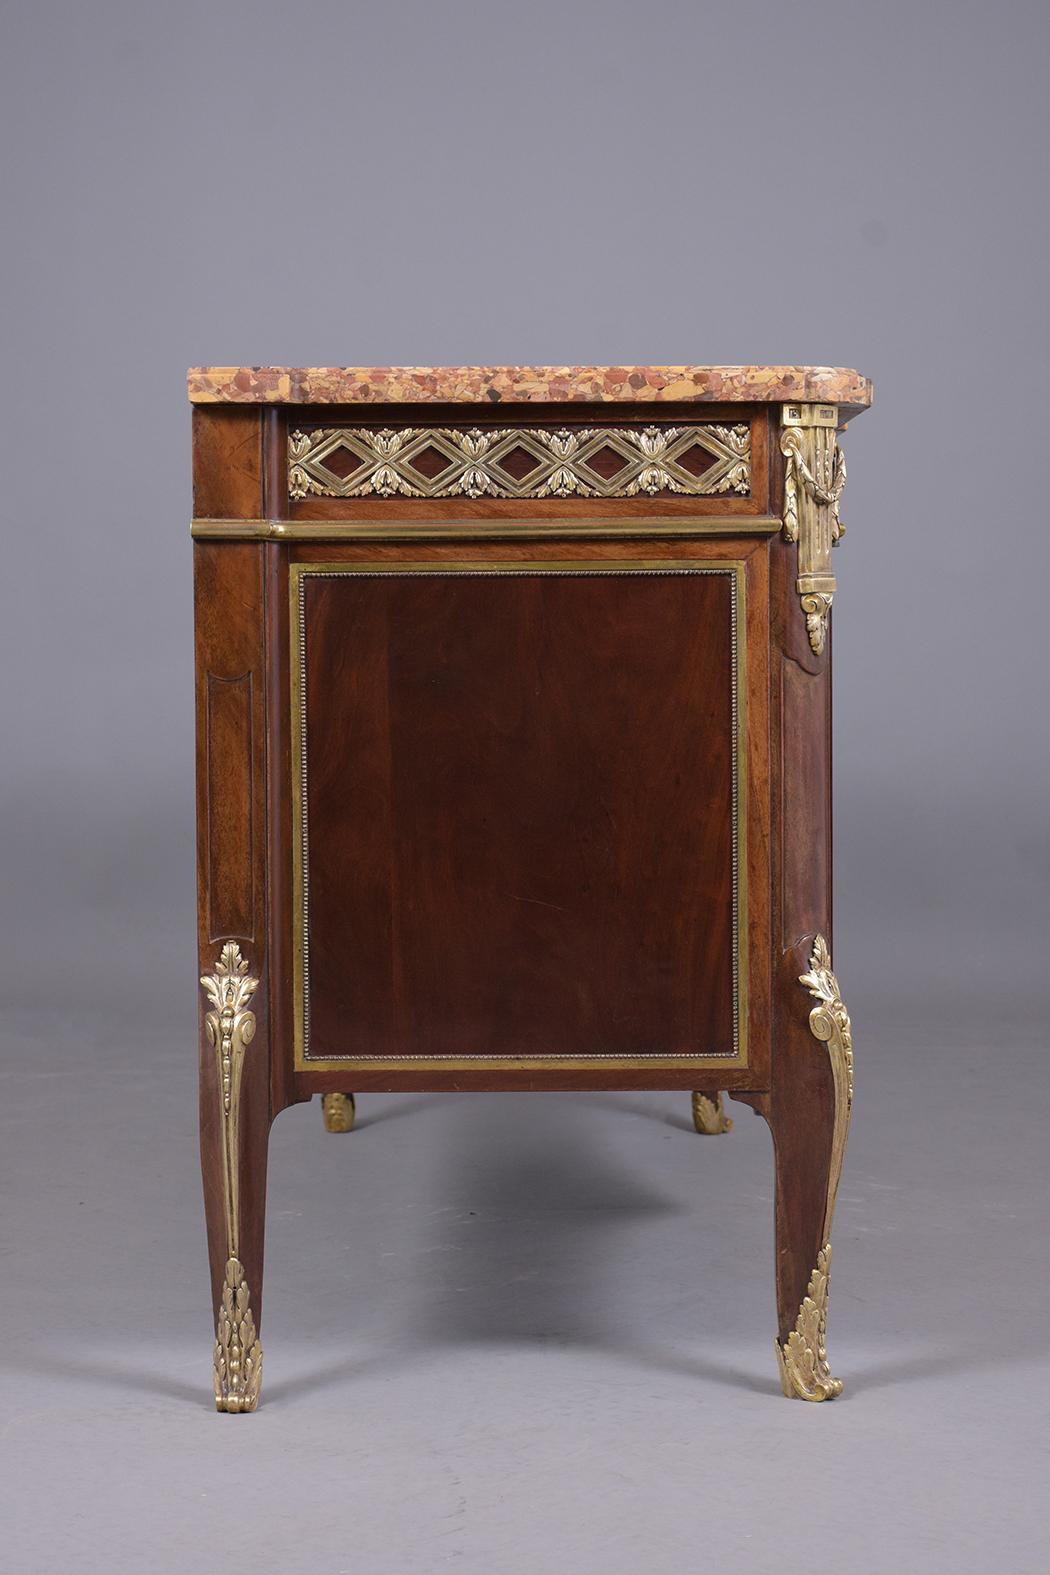 19th-Century French Louis XVI Buffet: Antique Mahogany and Bronze Marquetry Comm 8